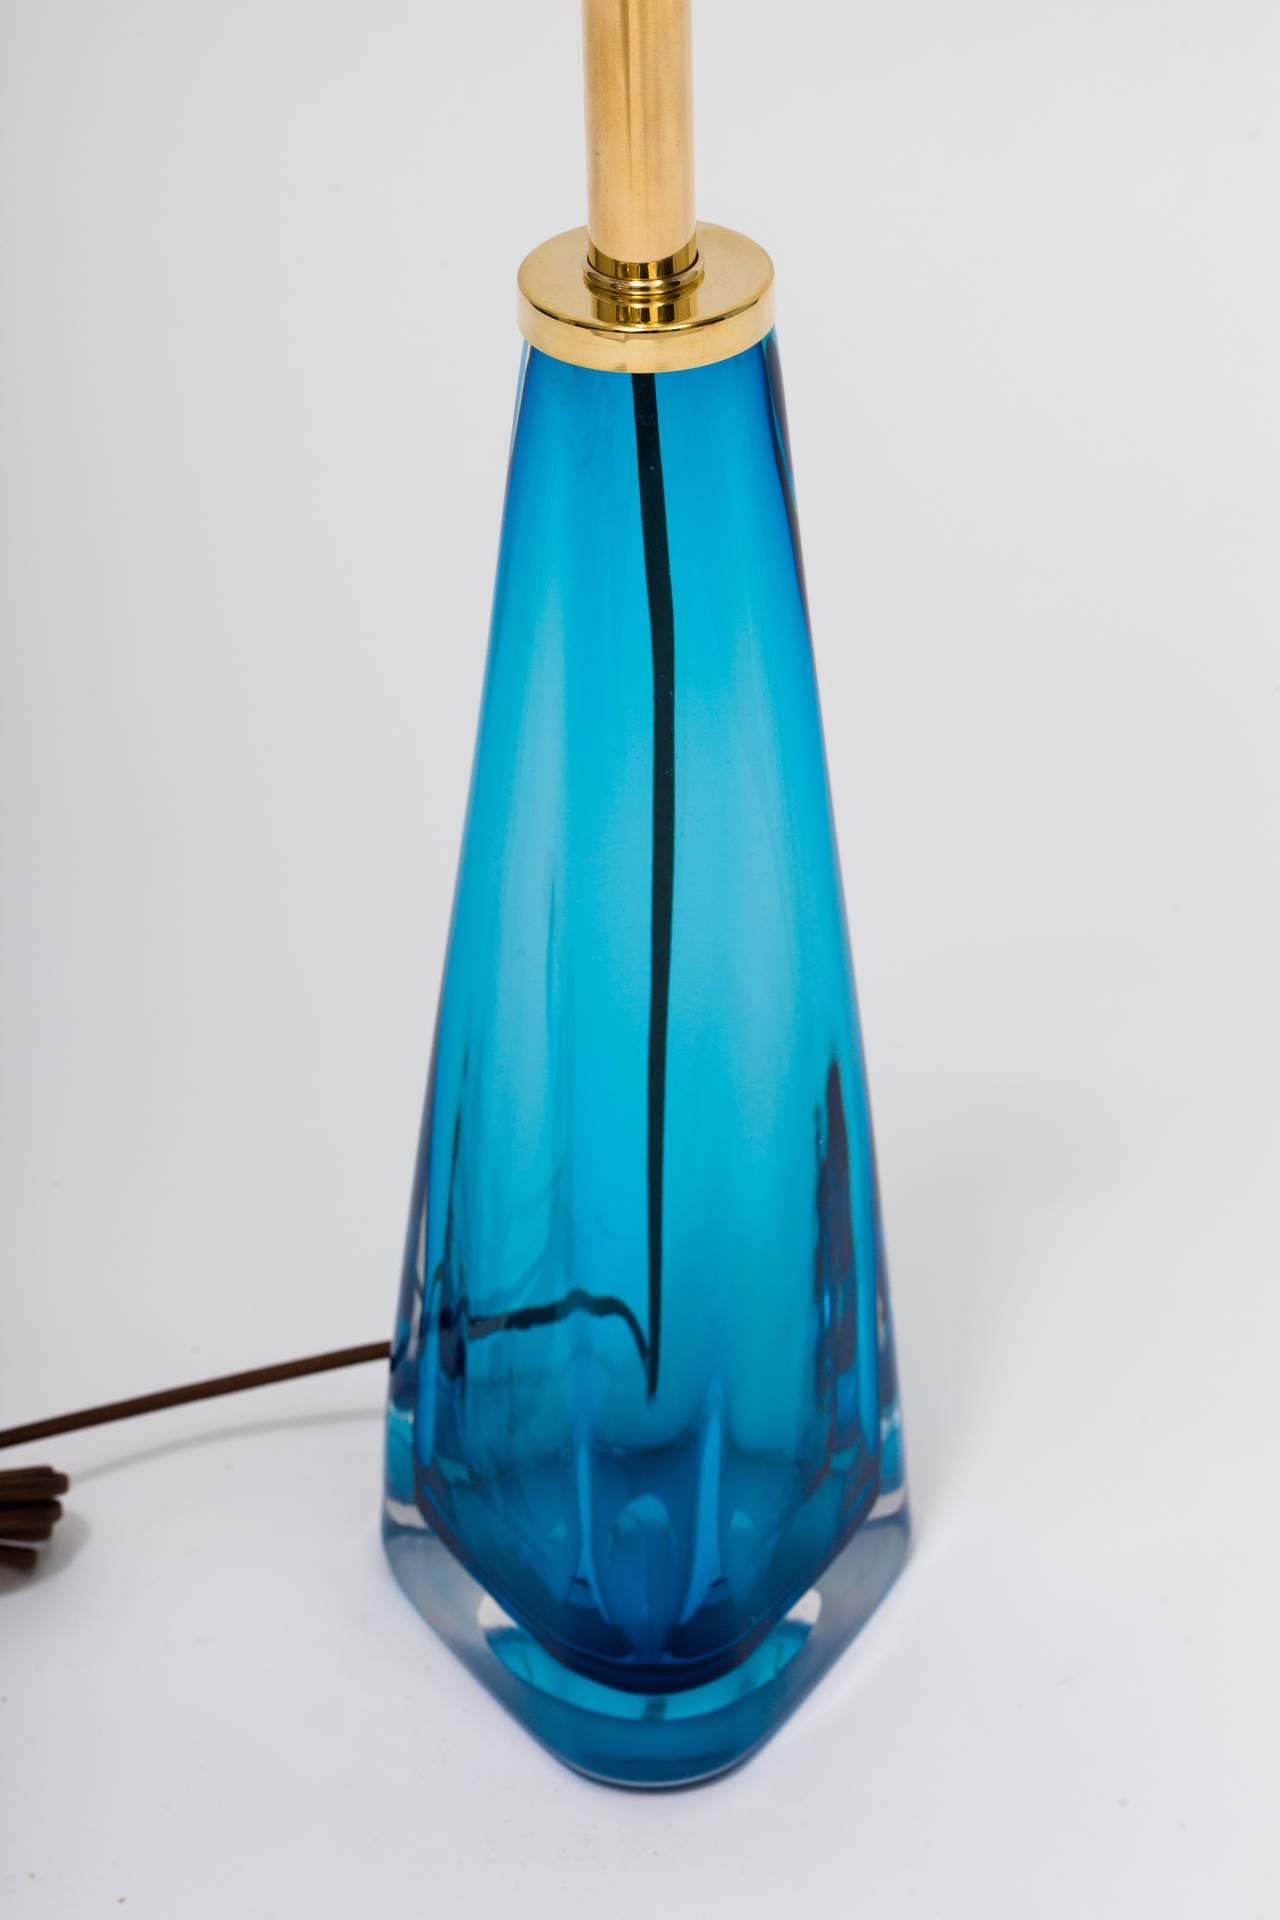 American Pair of Blue Glass Lamps in the Manner of Nils Landberg For Sale